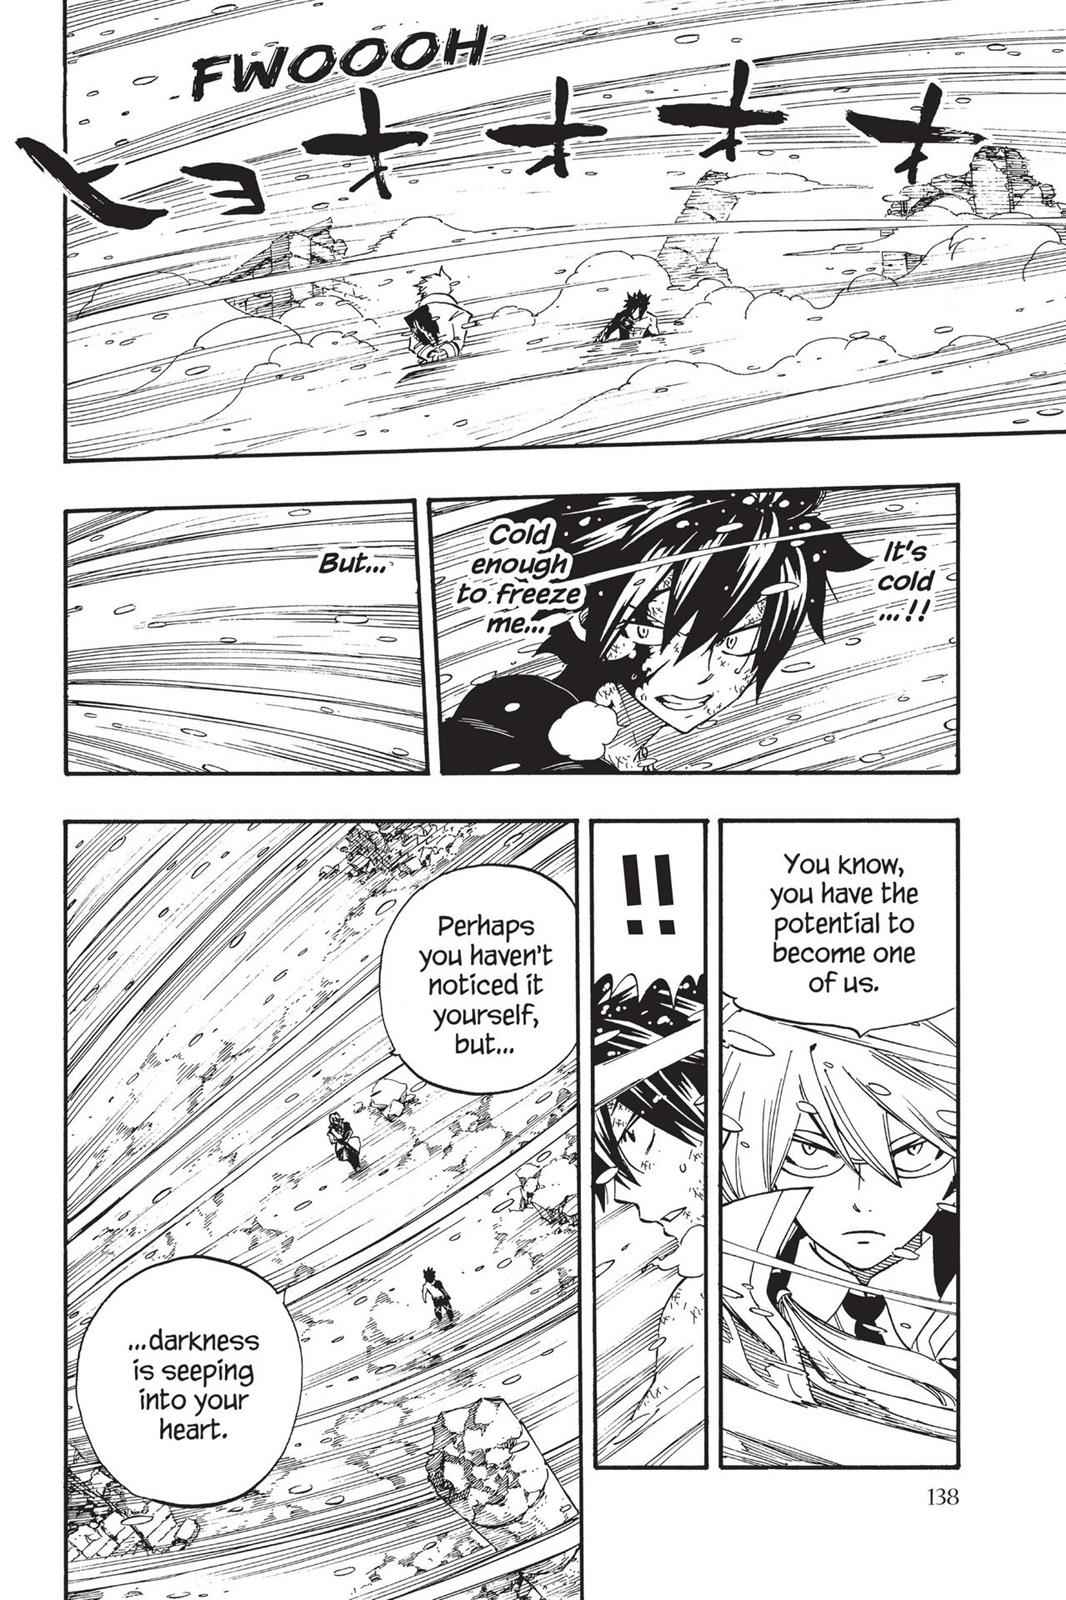  Chapter 498 image 011